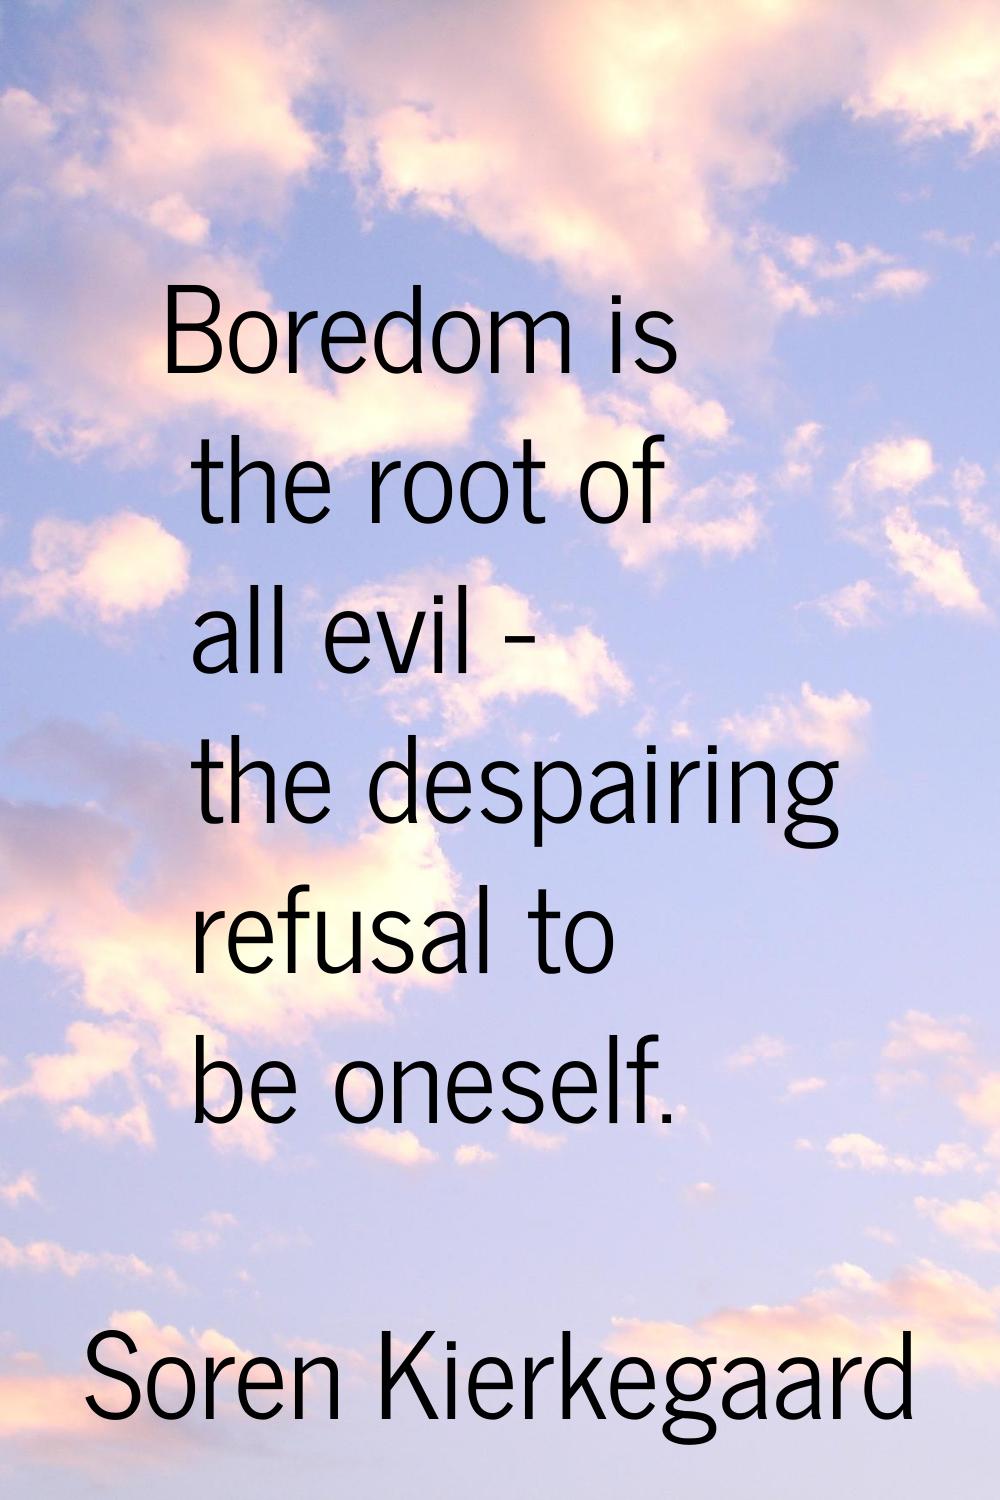 Boredom is the root of all evil - the despairing refusal to be oneself.